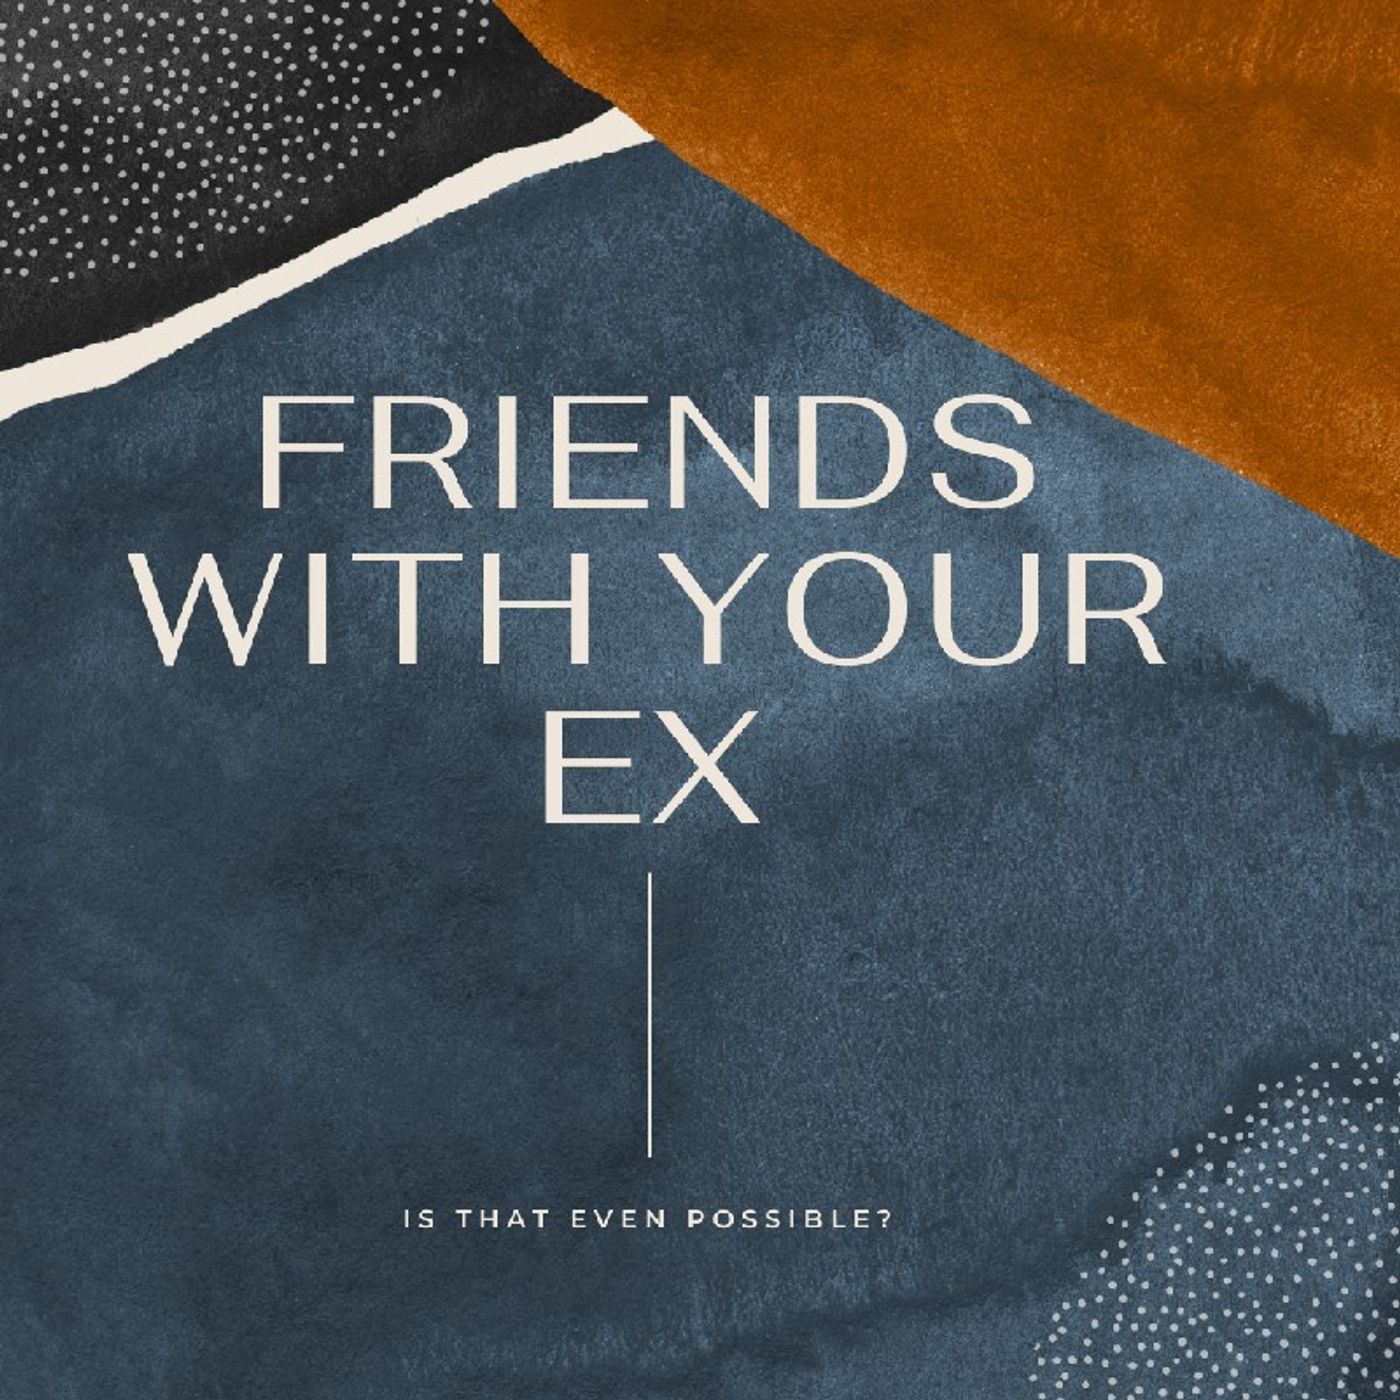 Can You Be Friends With Your Ex?